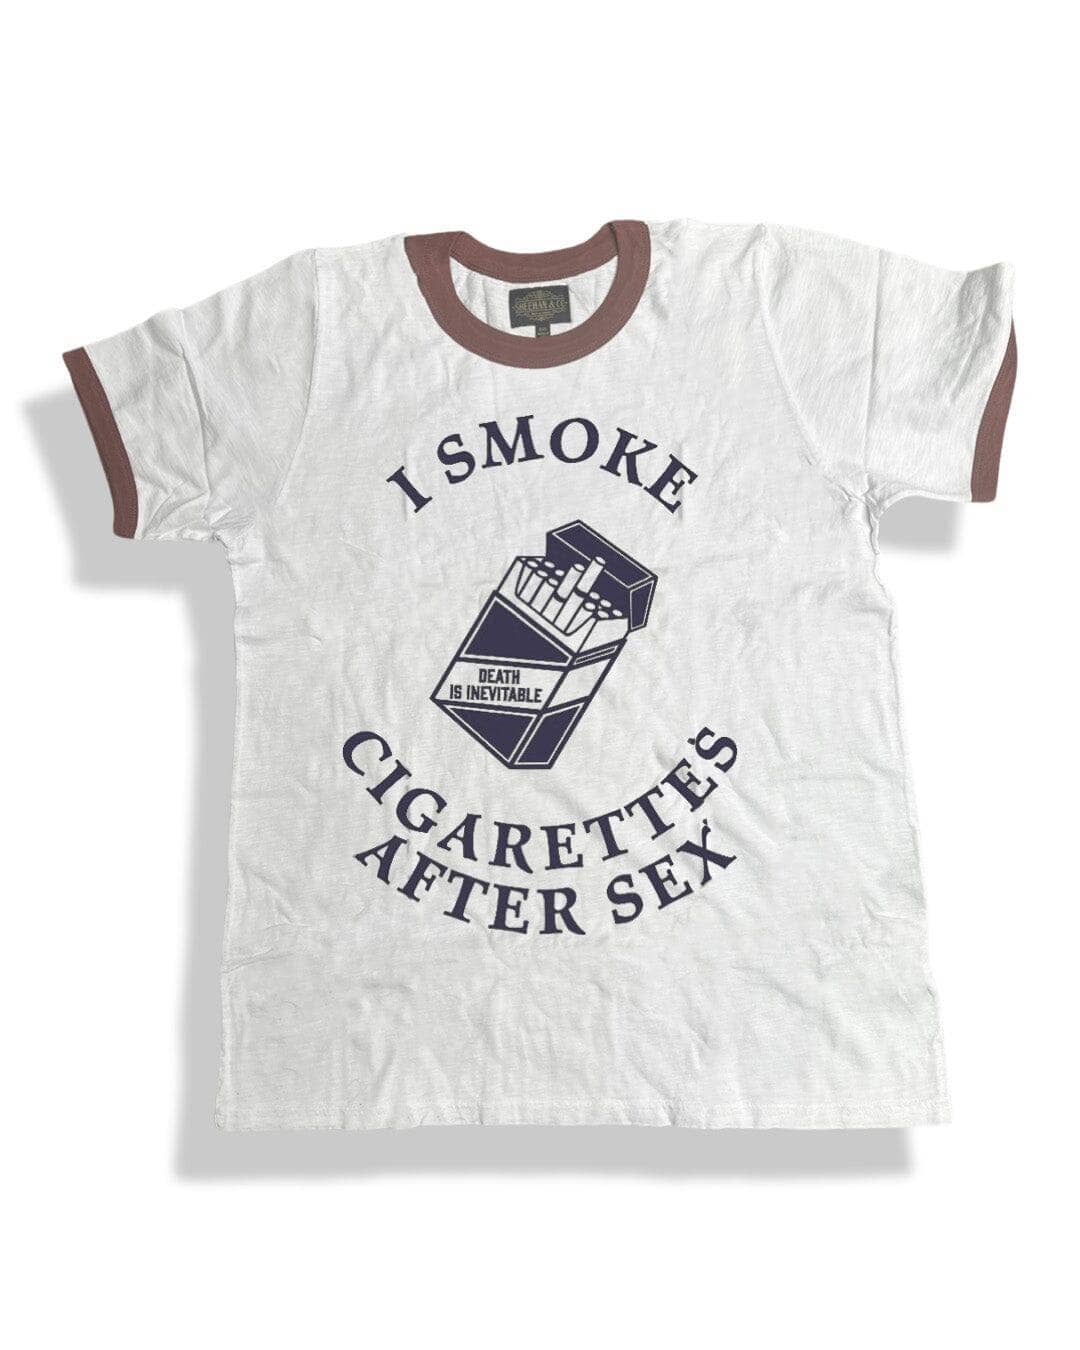 I Smoke Cigarettes After Sexy Statement Graphic Tee - Sheehan and Co.